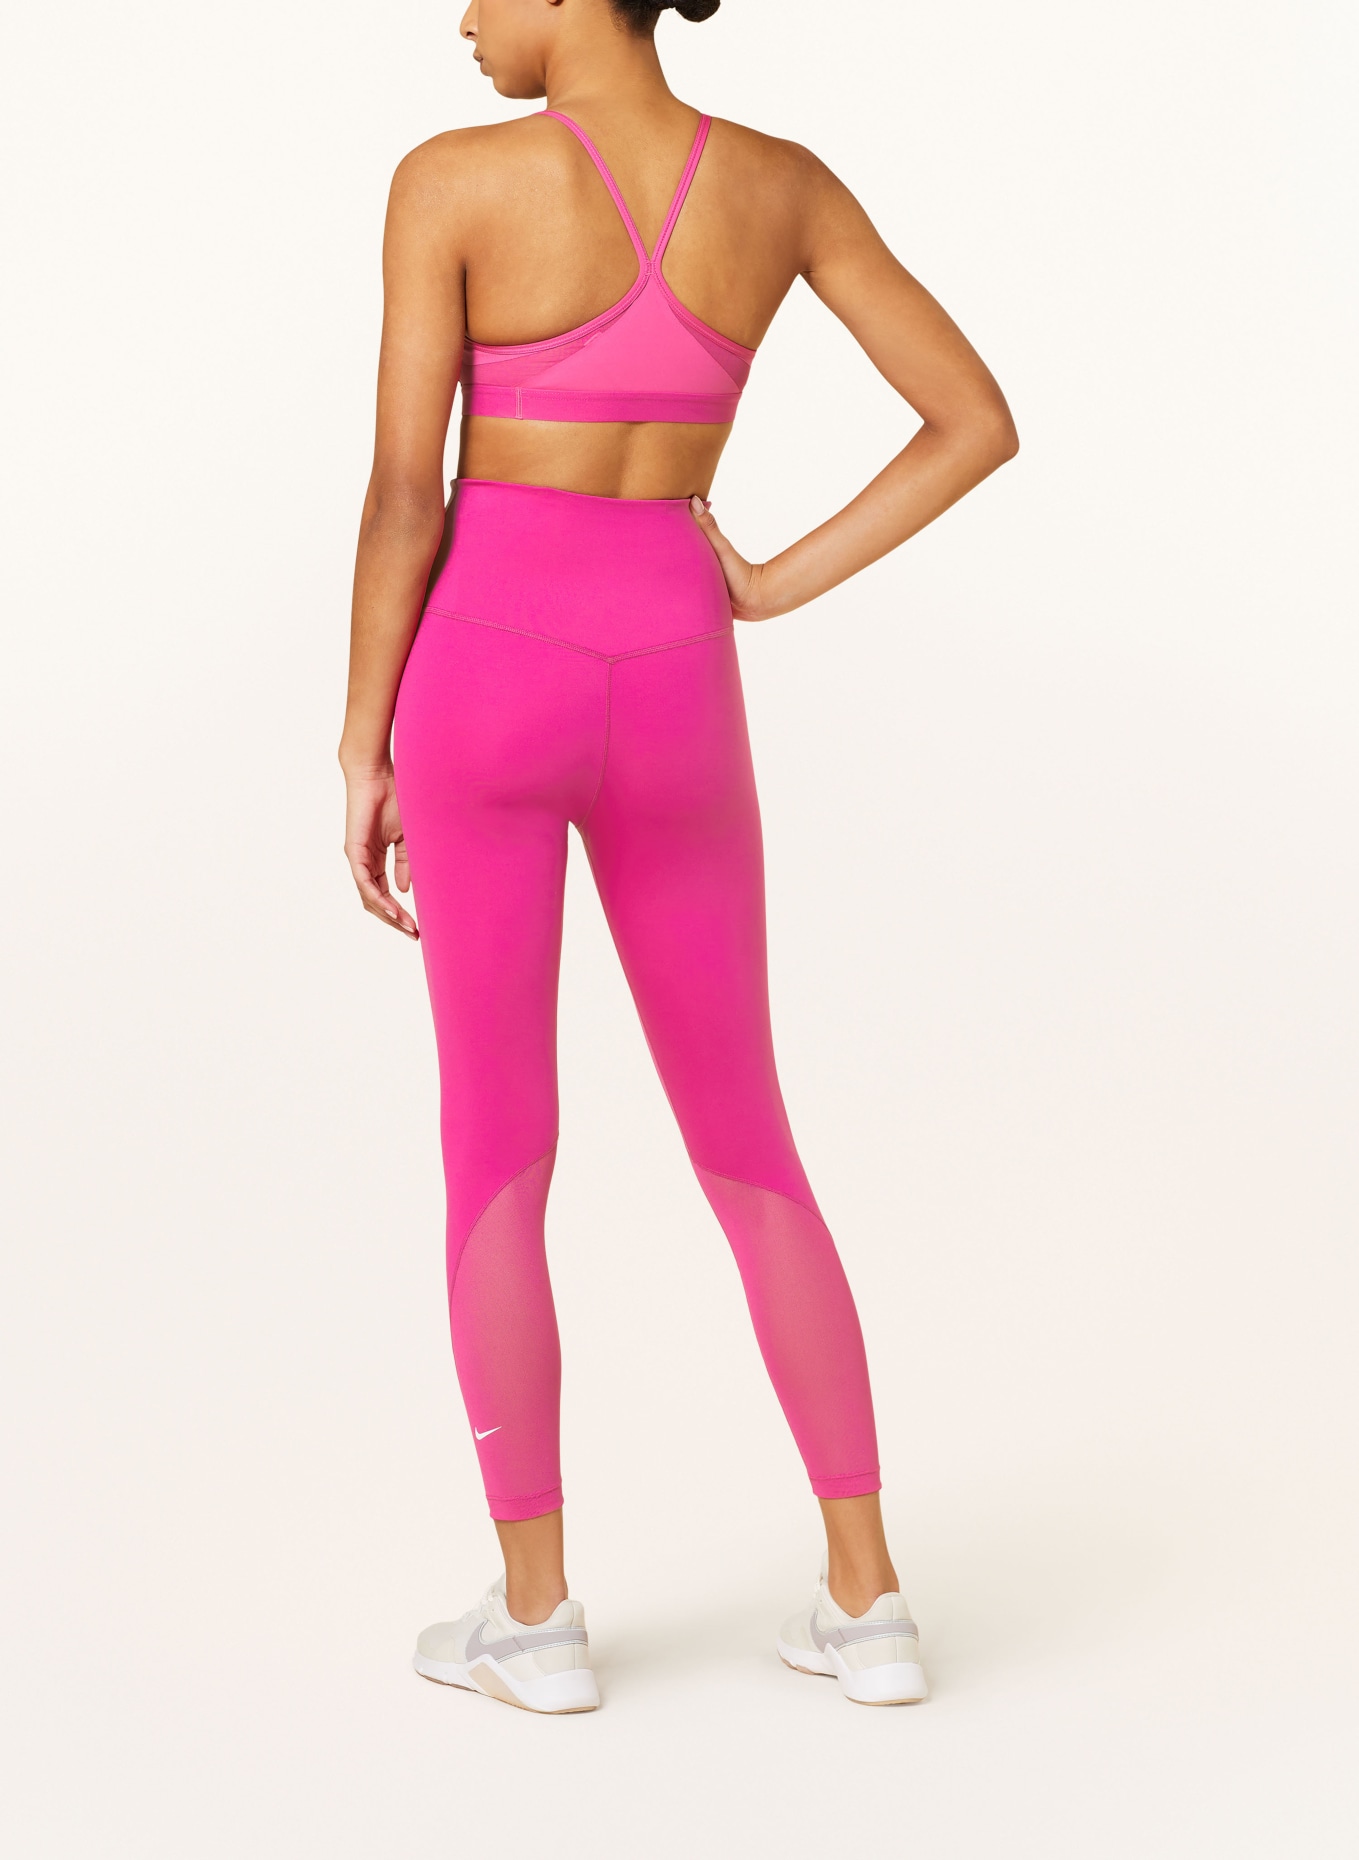 Nike Sports bra INDY, Color: PINK (Image 3)